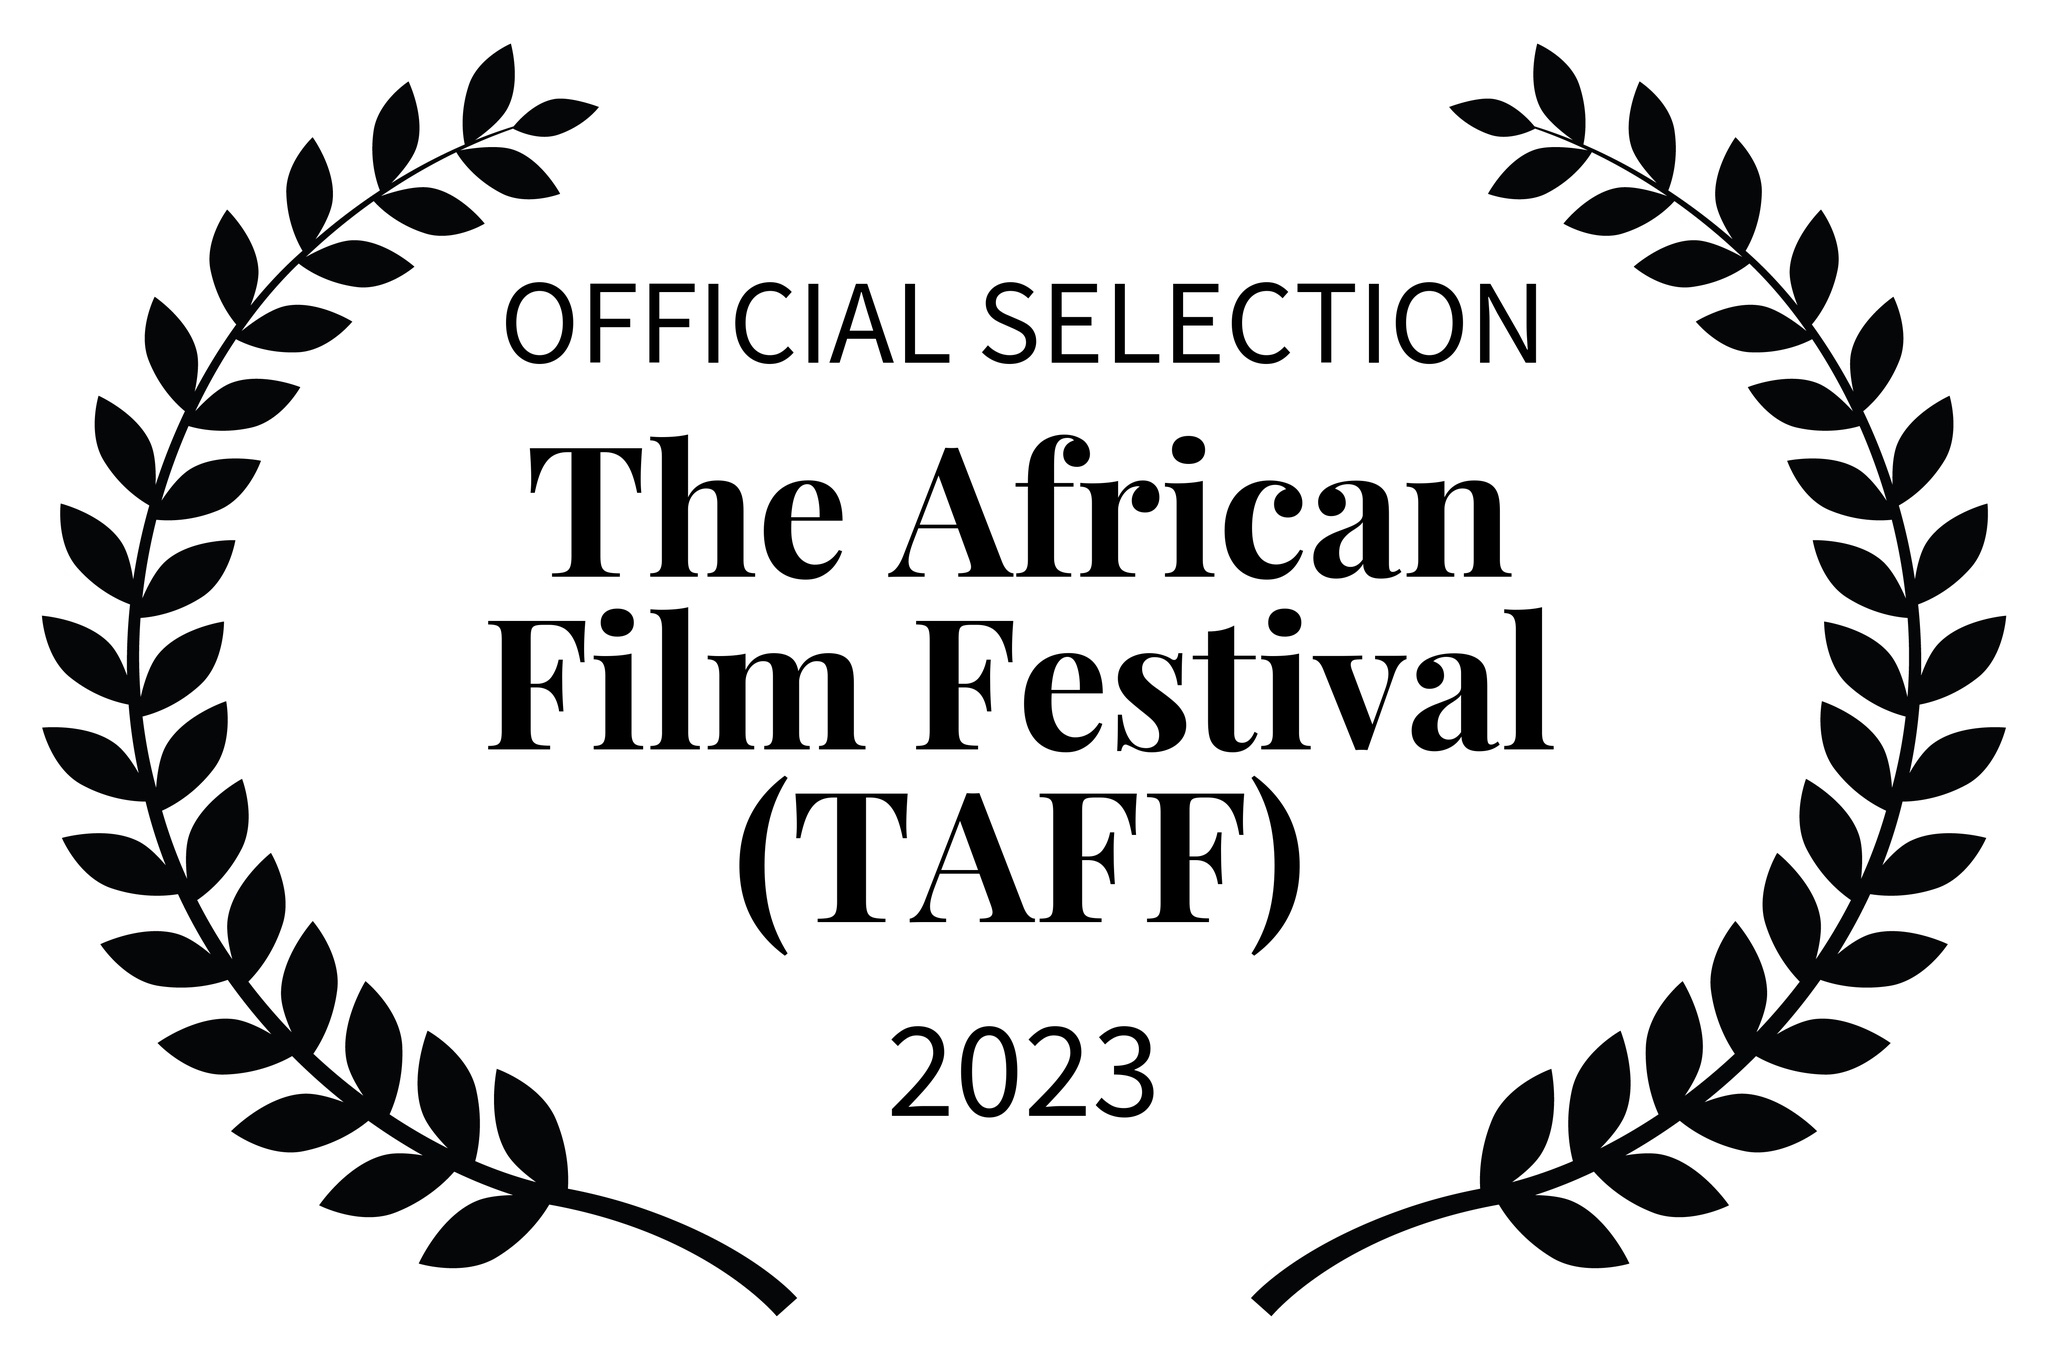 Official Selection of the African Film Festival 2023